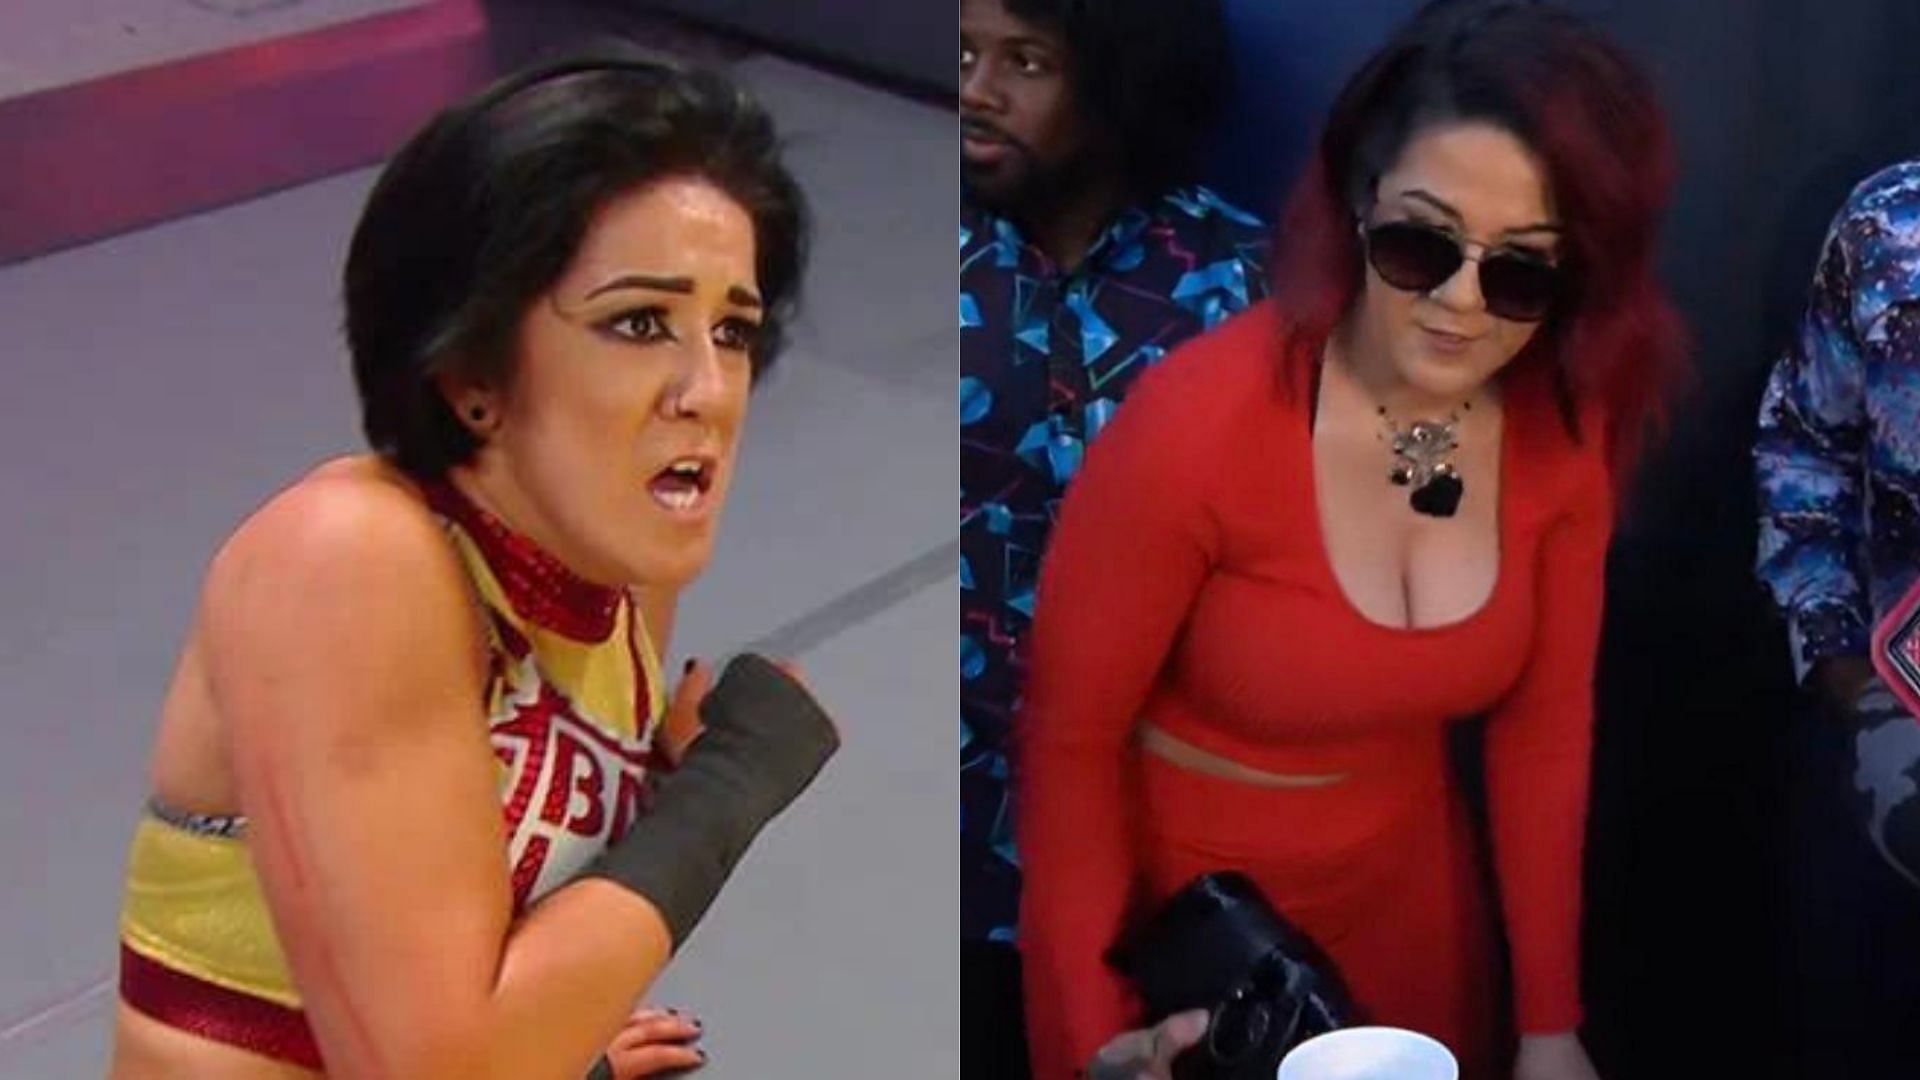 Bayley is currently feuding with Shotzi on WWE programming